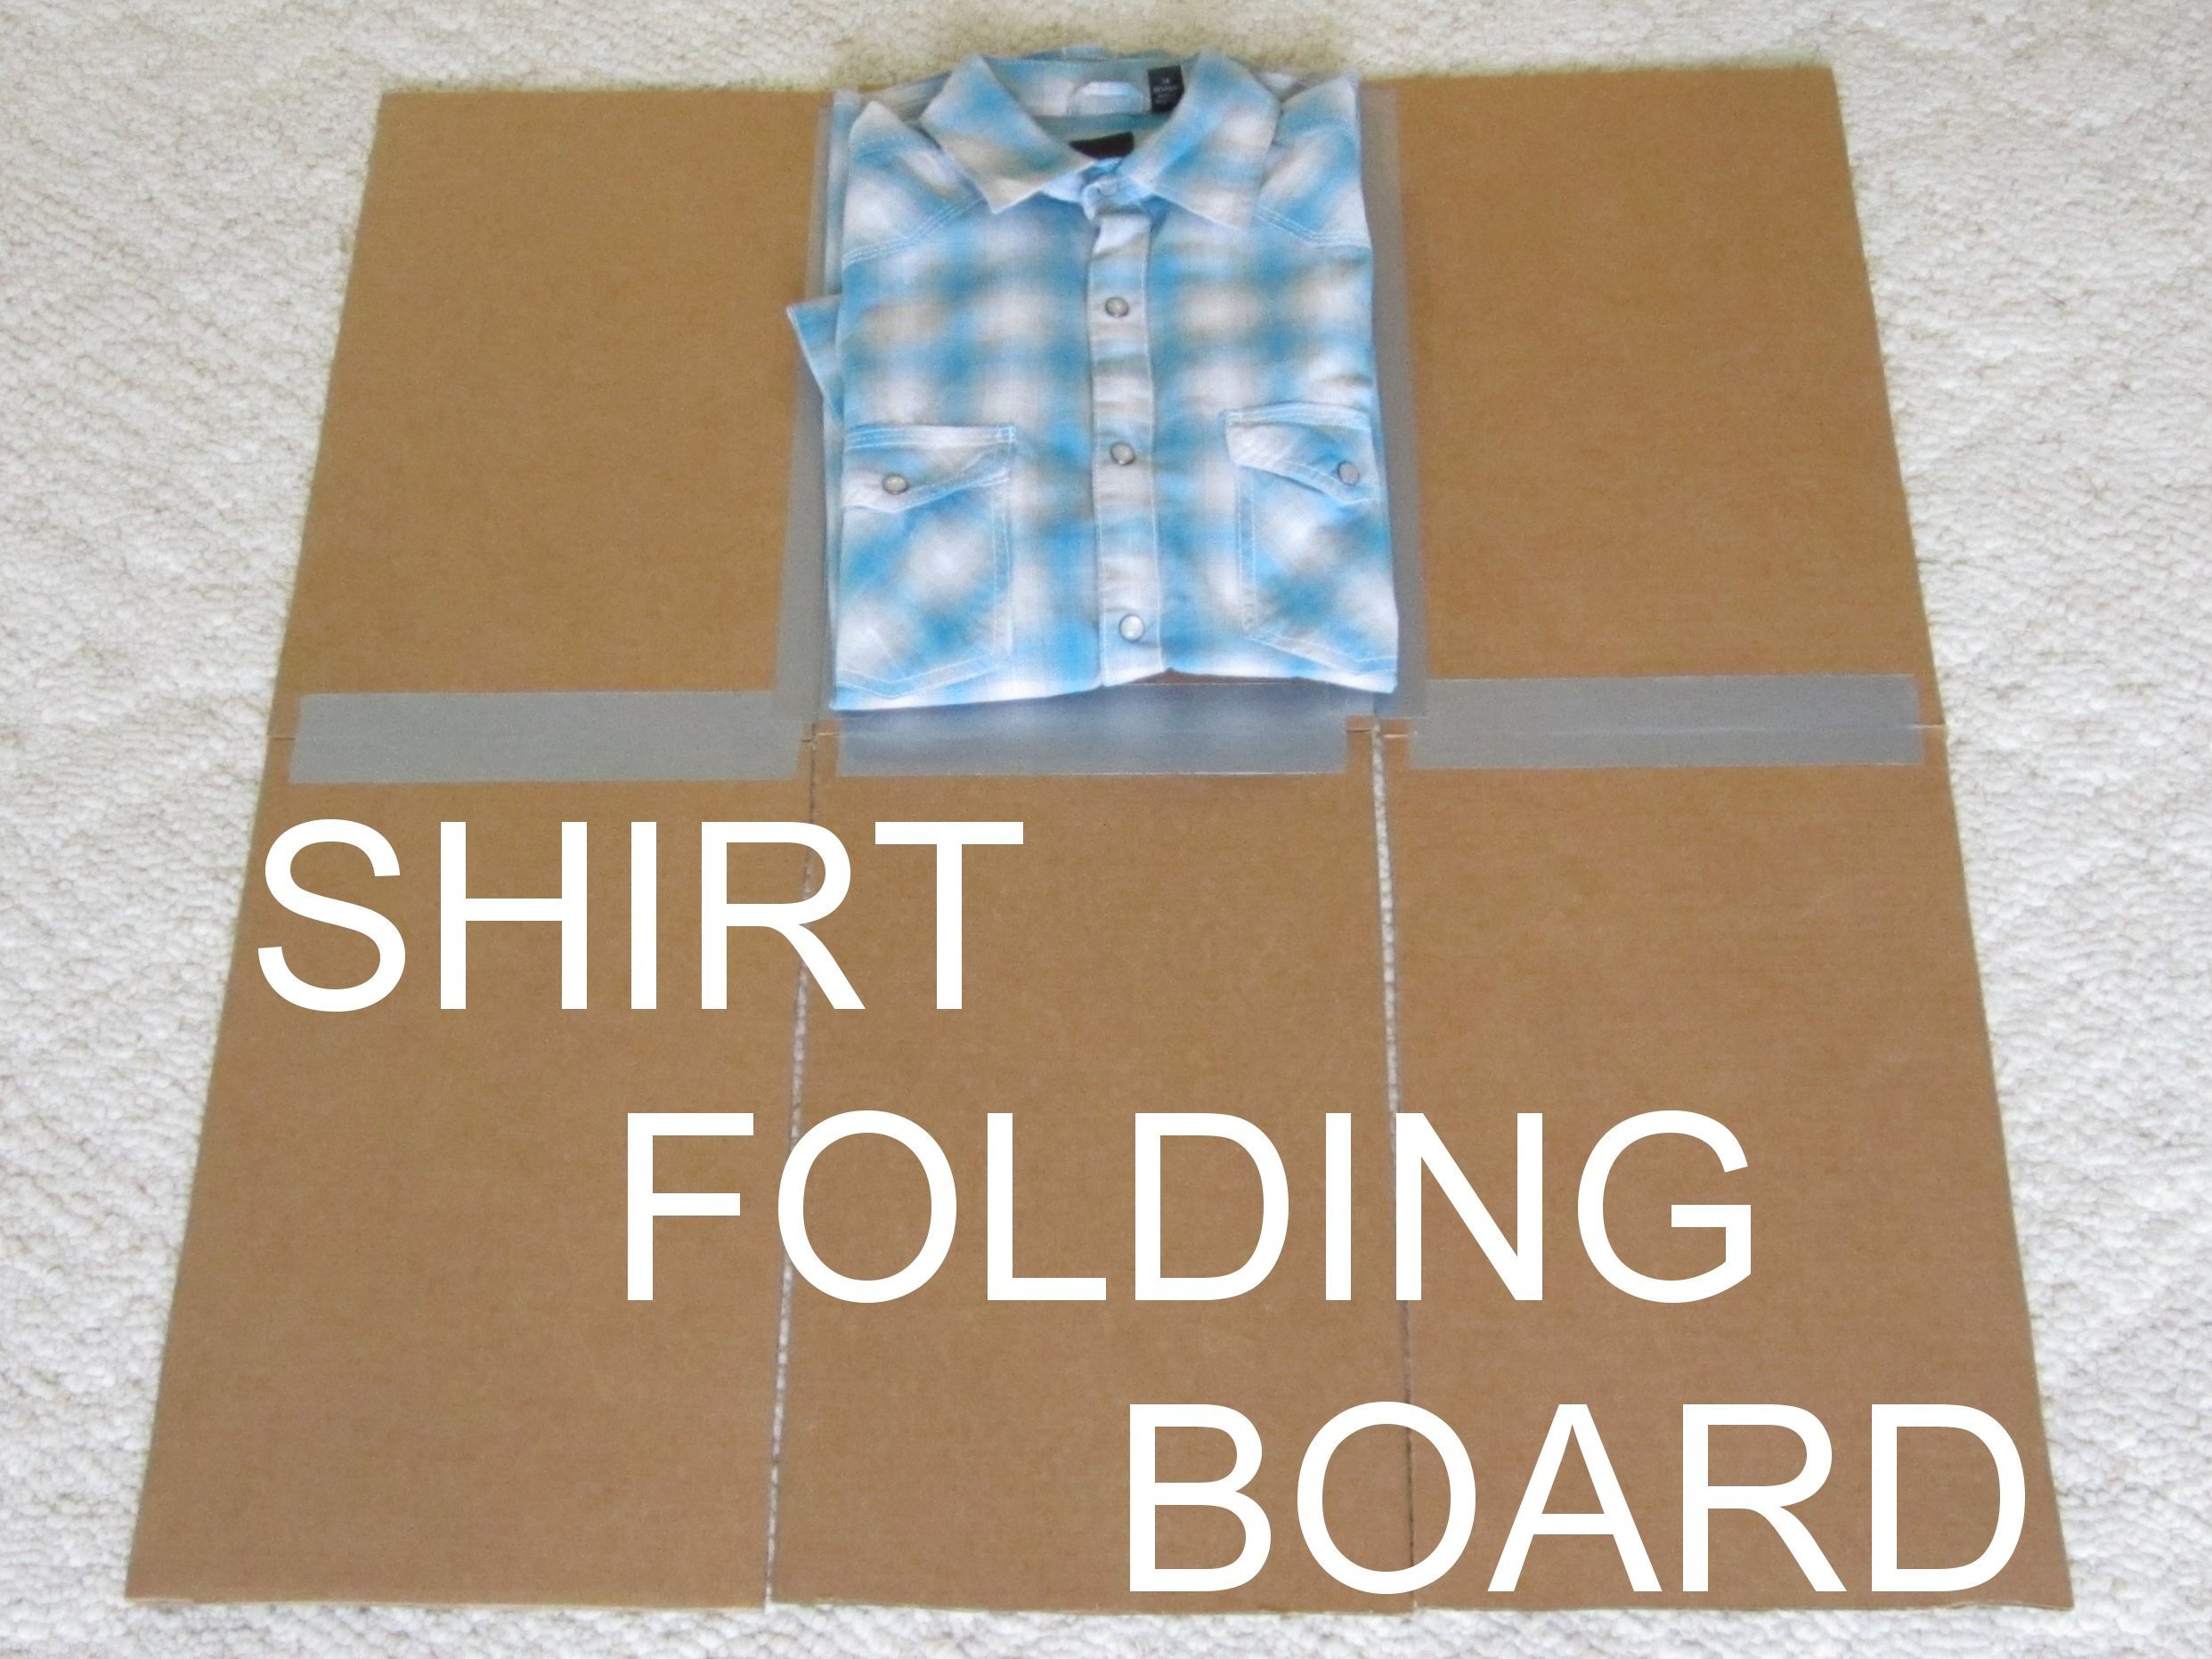 How to Fold a t-shirt using cardboard